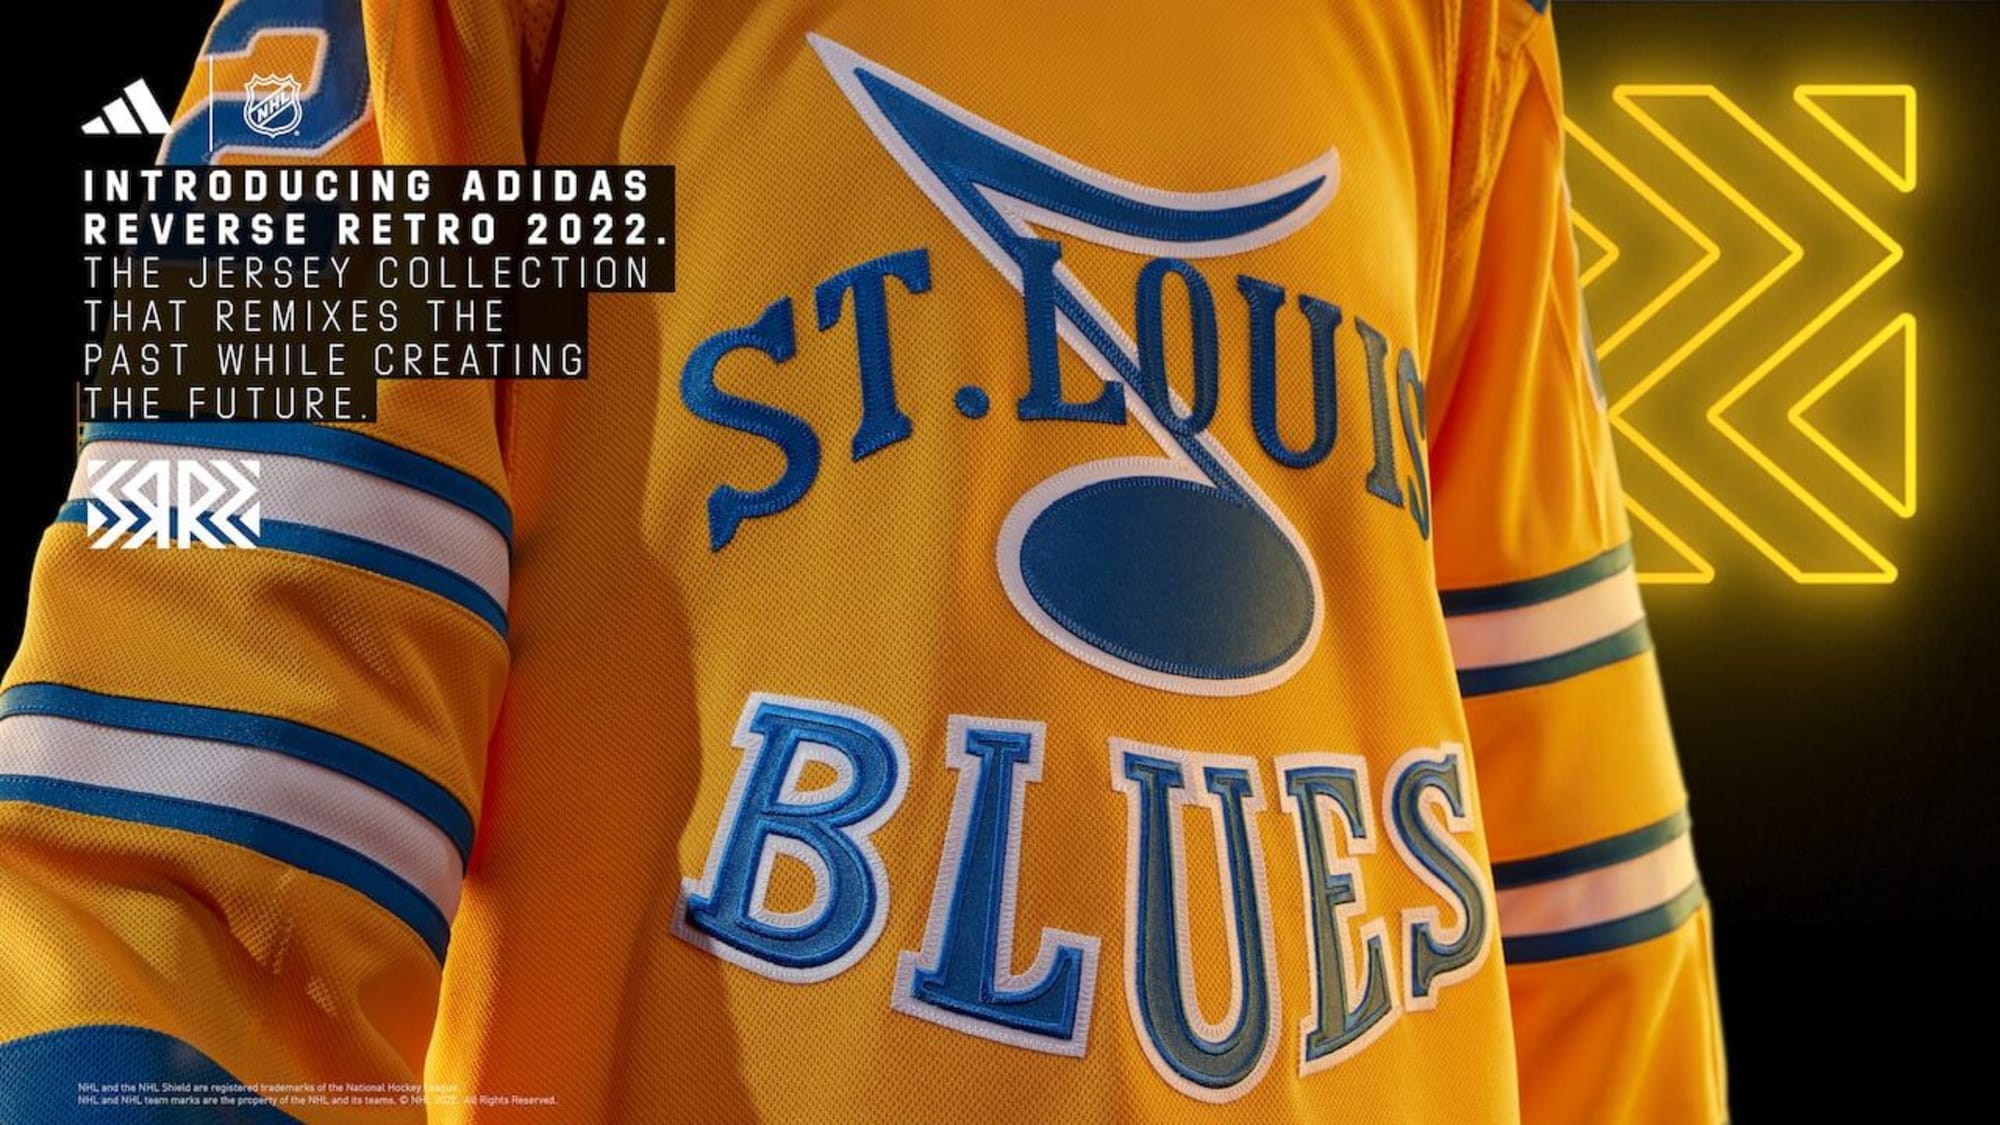 Reverse Retrogate: the curse of the blue jersey